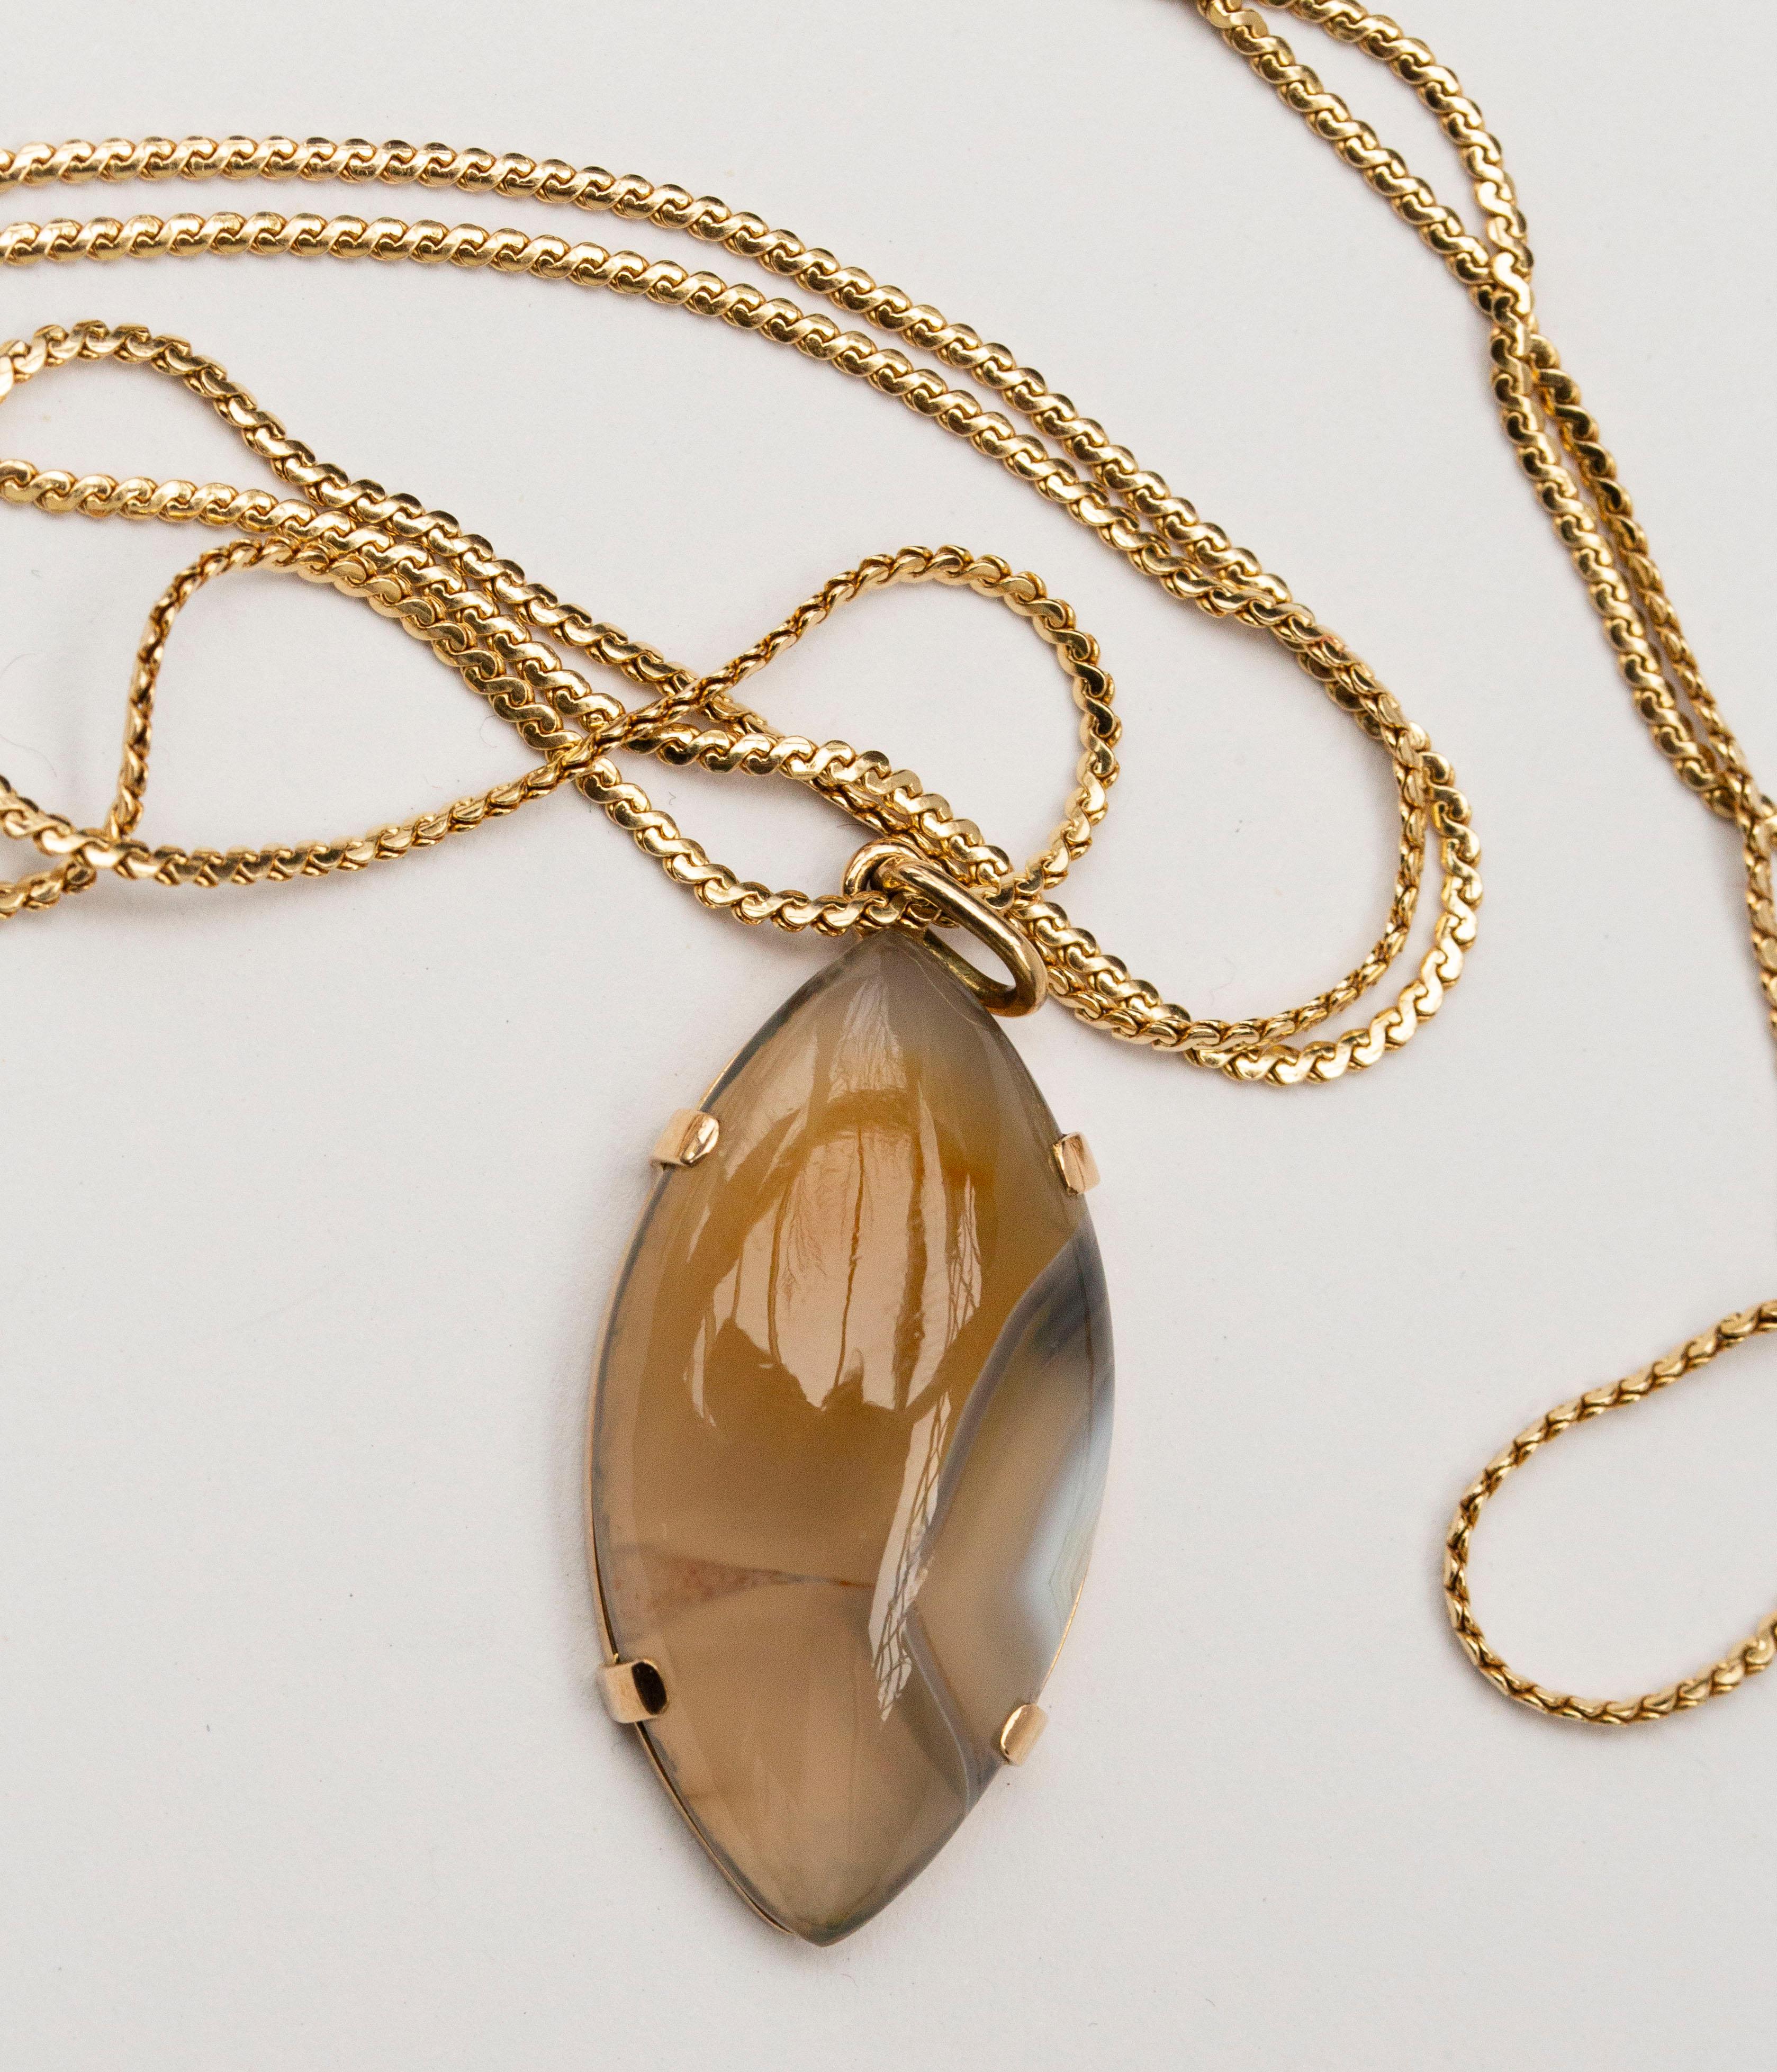 14 Karat Gold Necklace Chain with an Agate Pendant in 14 Karat Gold Setting In Good Condition For Sale In Arnhem, NL